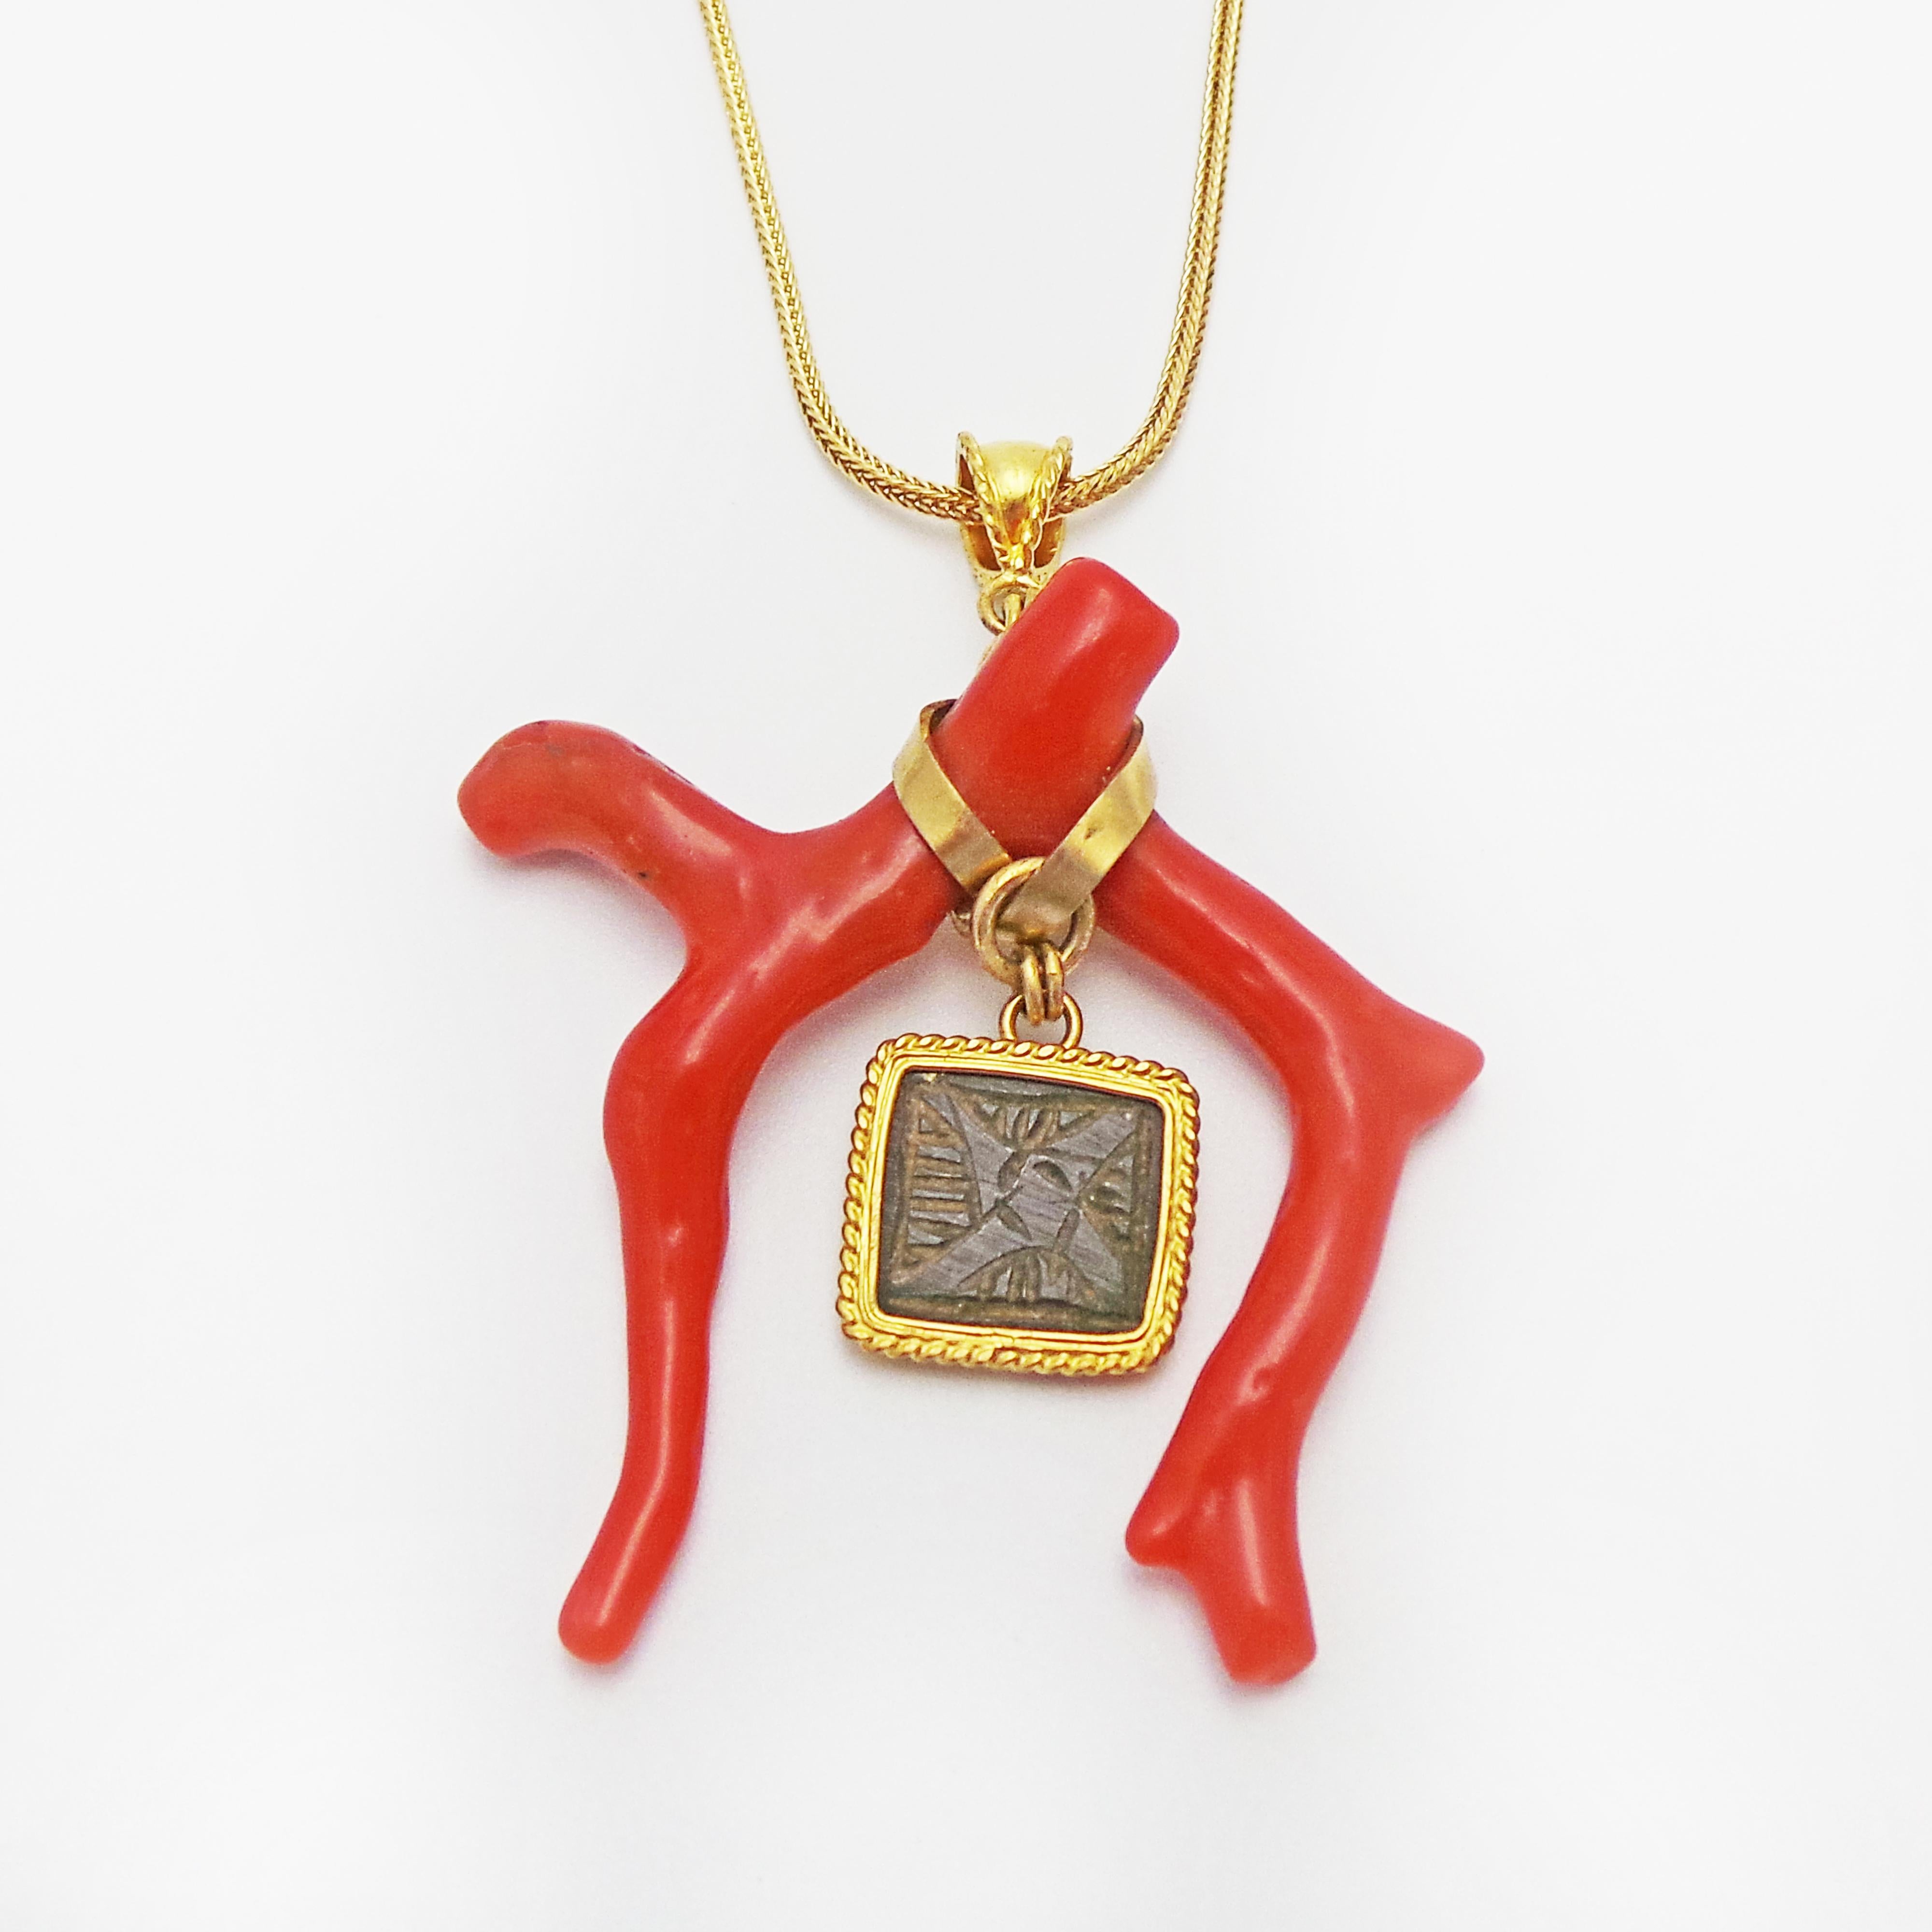 Authentic ancient Roman bronze square artifact with carved, intaglio floral decoration (1st-3rd century AD) dangles in an organic branch coral pendant set in 22k yellow gold on an 18k yellow gold foxtail chain. Coral is the color of 2019. 